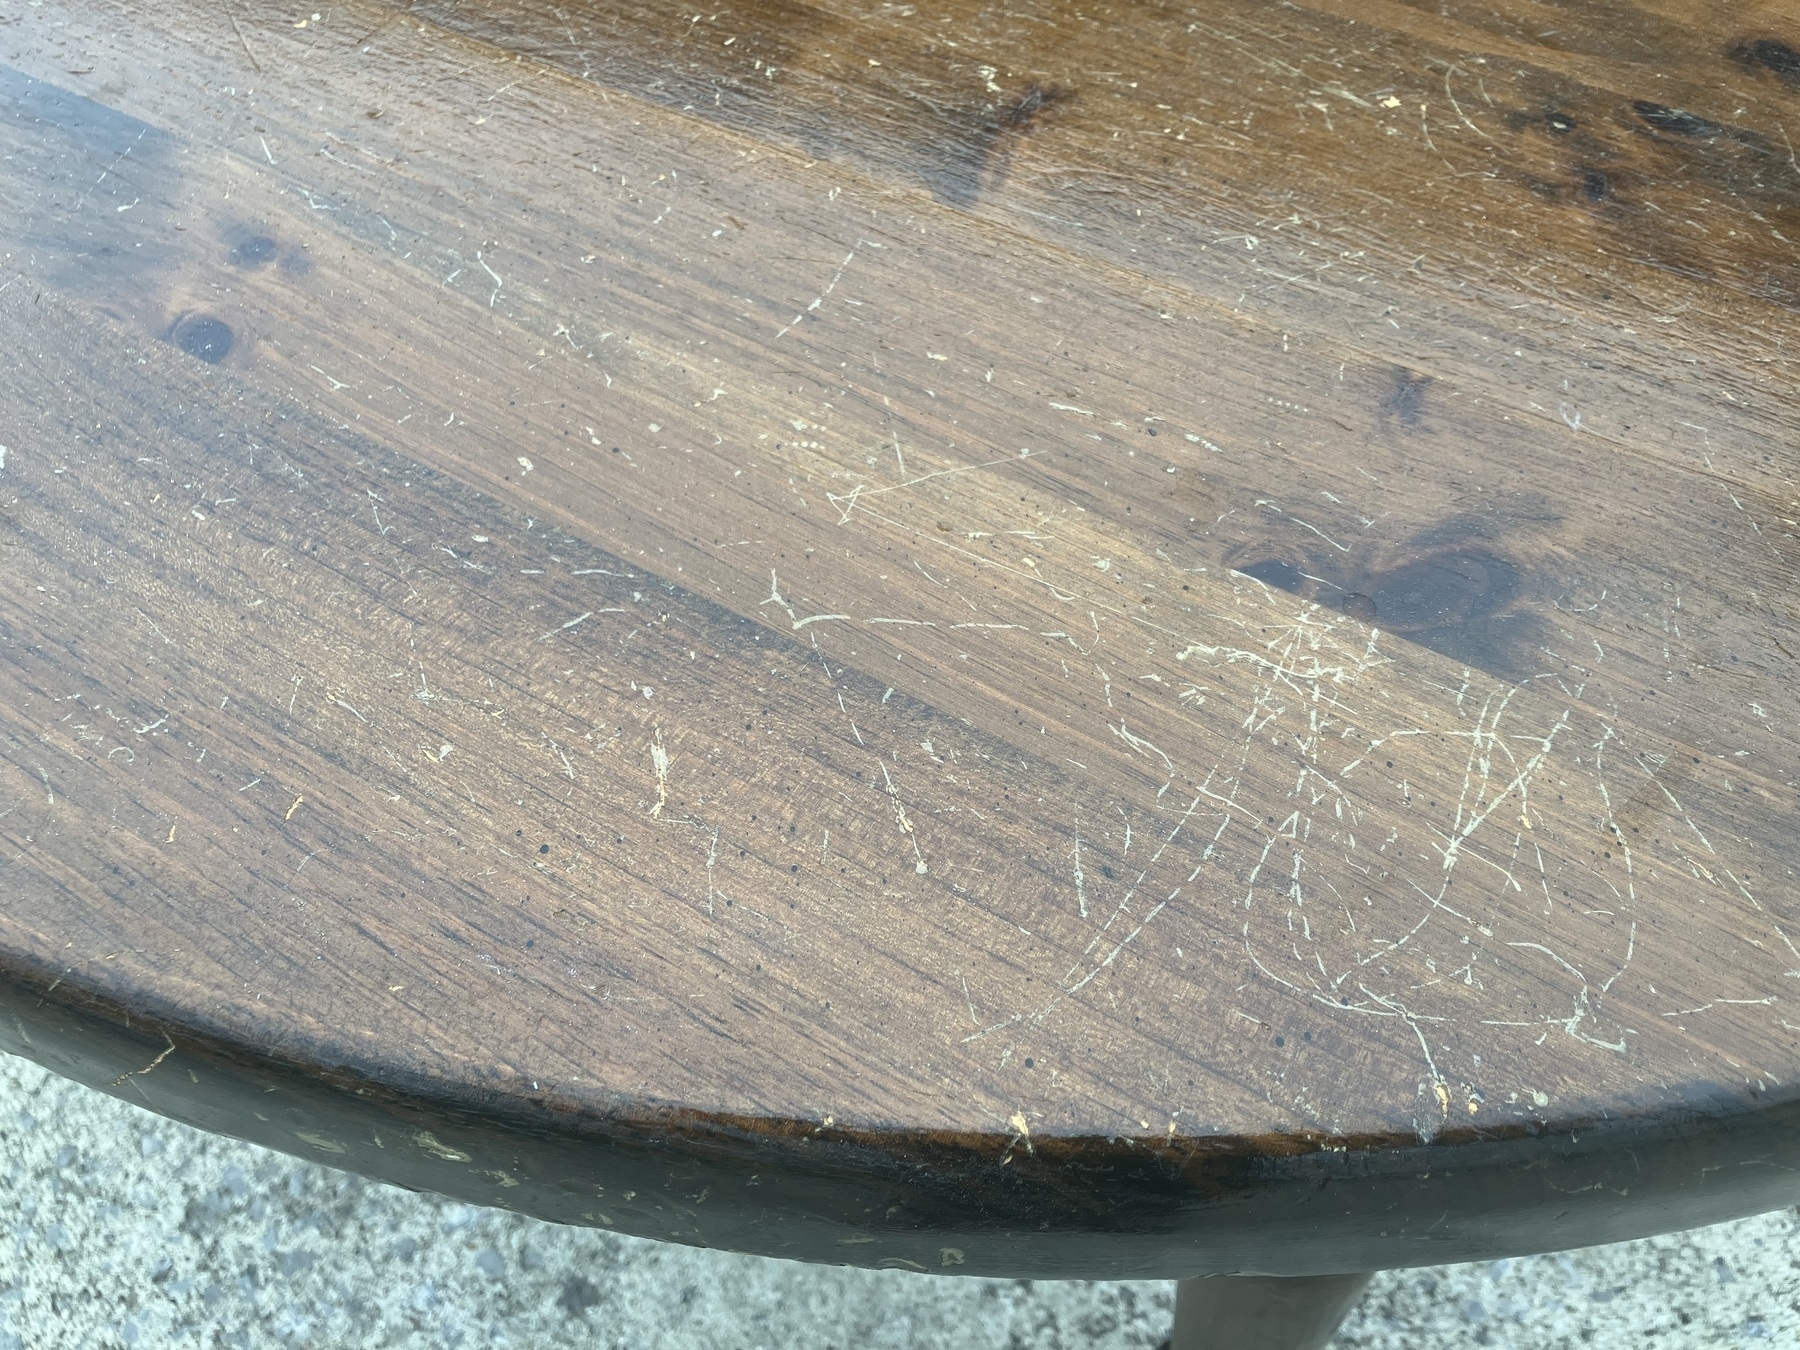 Auto-generated description: A wooden tabletop is scratched and worn, showing signs of heavy use.